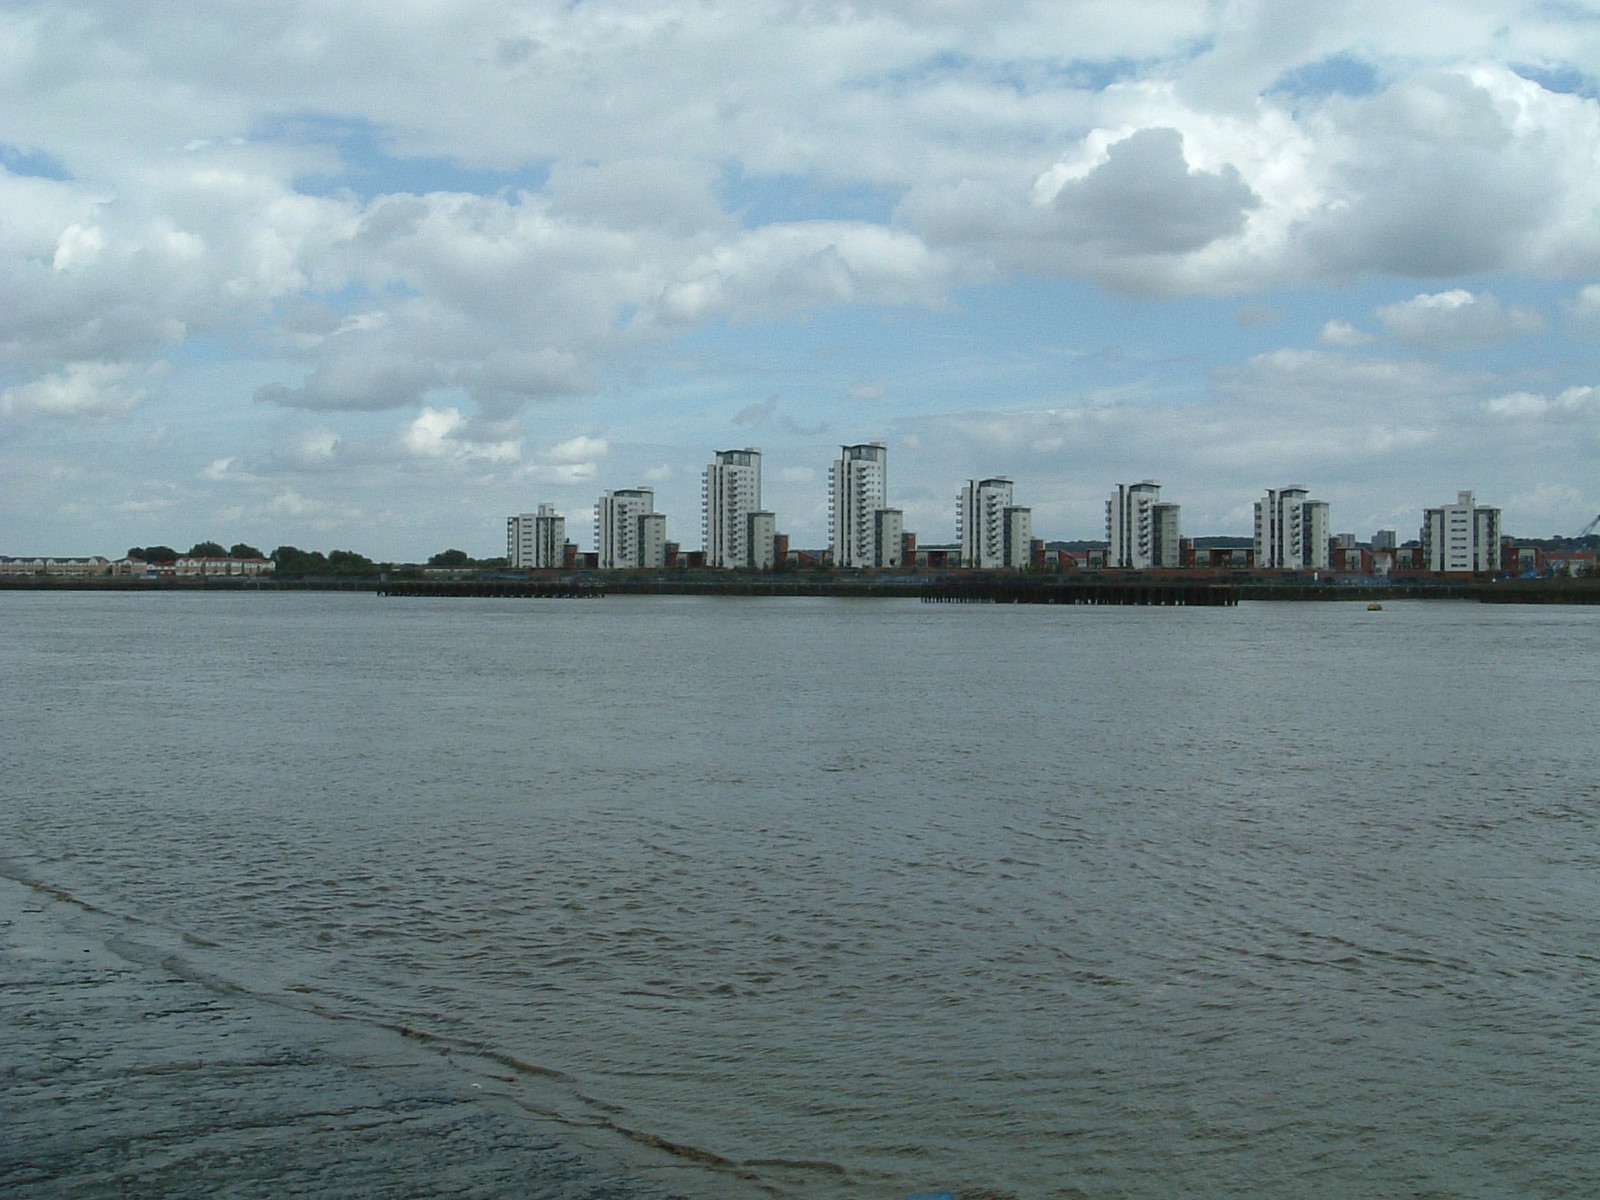 Looking across the Thames